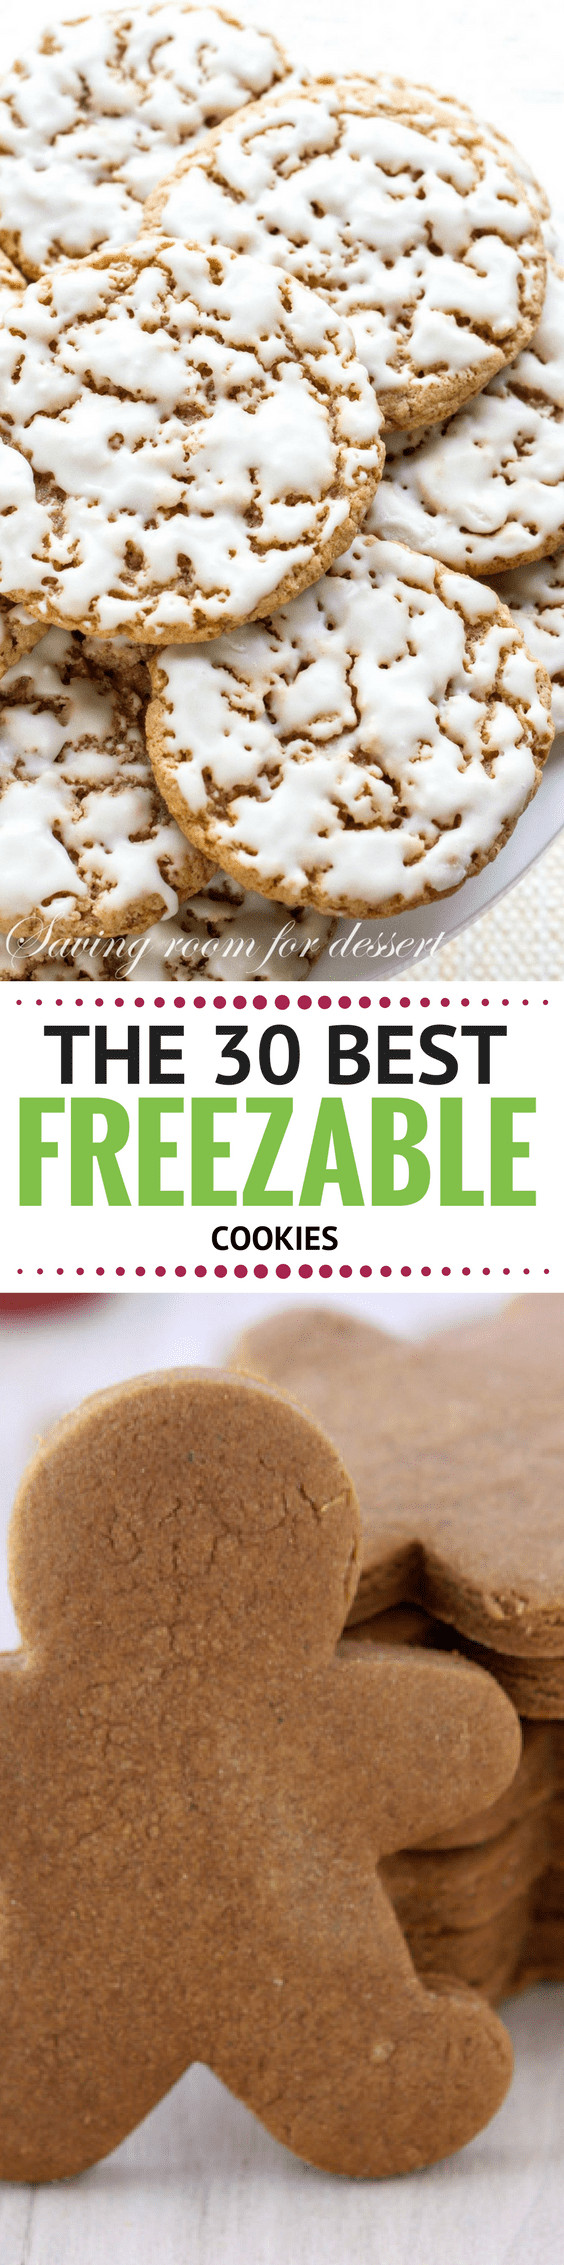 Christmas Cookies That Freeze Well
 bar cookies that freeze well